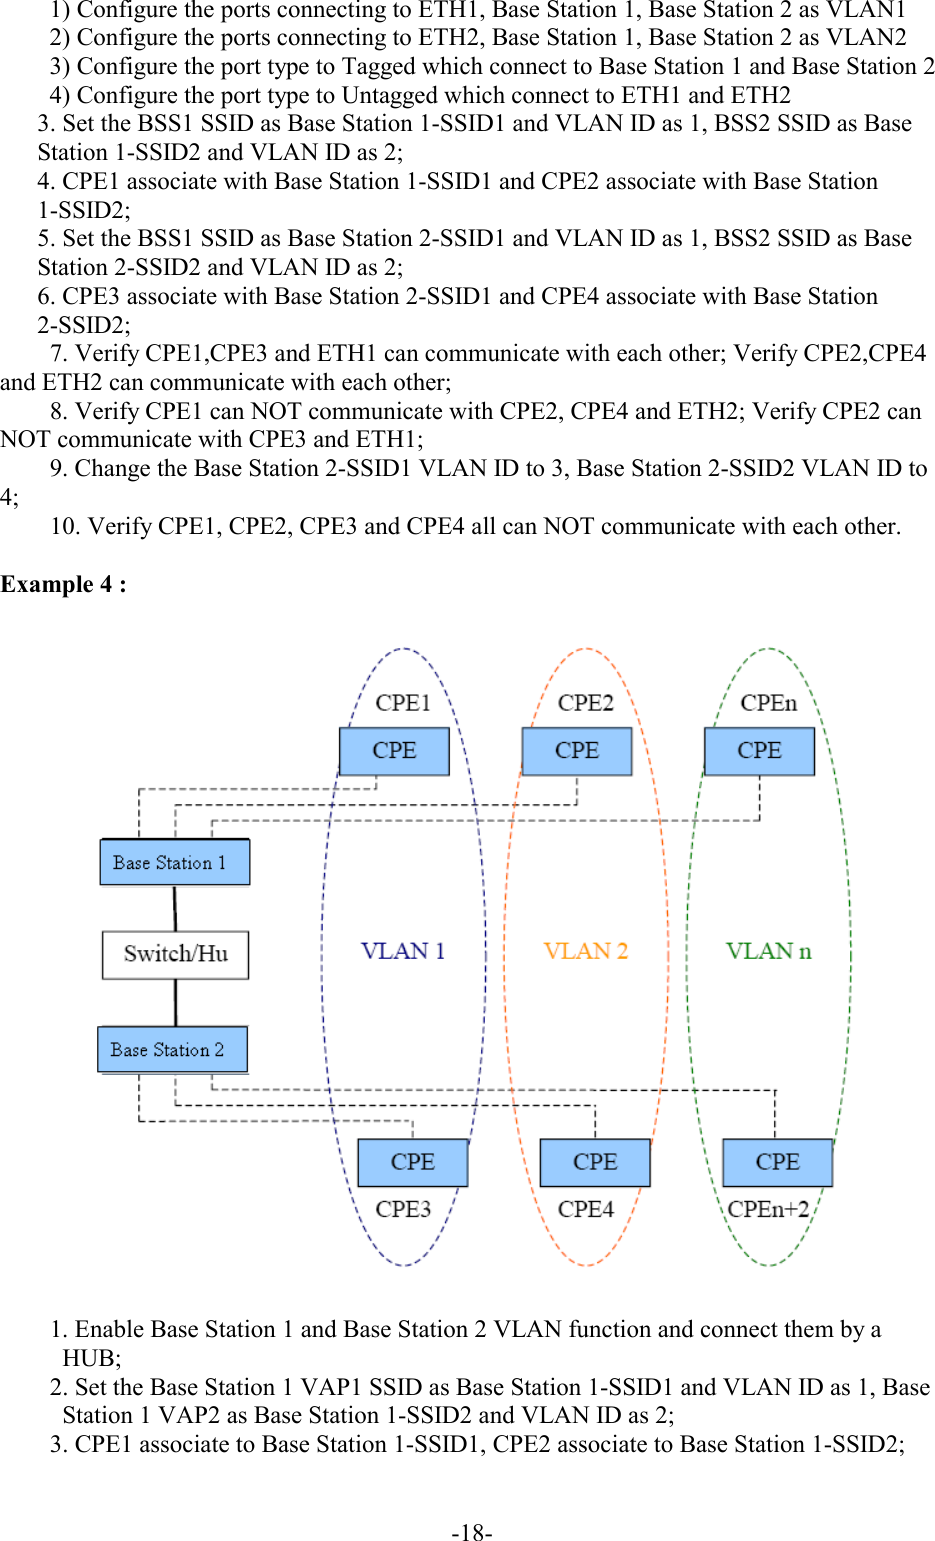  -18- 1) Configure the ports connecting to ETH1, Base Station 1, Base Station 2 as VLAN1    2) Configure the ports connecting to ETH2, Base Station 1, Base Station 2 as VLAN2    3) Configure the port type to Tagged which connect to Base Station 1 and Base Station 2    4) Configure the port type to Untagged which connect to ETH1 and ETH2     3. Set the BSS1 SSID as Base Station 1-SSID1 and VLAN ID as 1, BSS2 SSID as Base Station 1-SSID2 and VLAN ID as 2;     4. CPE1 associate with Base Station 1-SSID1 and CPE2 associate with Base Station 1-SSID2;    5. Set the BSS1 SSID as Base Station 2-SSID1 and VLAN ID as 1, BSS2 SSID as Base Station 2-SSID2 and VLAN ID as 2;     6. CPE3 associate with Base Station 2-SSID1 and CPE4 associate with Base Station 2-SSID2;    7. Verify CPE1,CPE3 and ETH1 can communicate with each other; Verify CPE2,CPE4       and ETH2 can communicate with each other;     8. Verify CPE1 can NOT communicate with CPE2, CPE4 and ETH2; Verify CPE2 can NOT communicate with CPE3 and ETH1;     9. Change the Base Station 2-SSID1 VLAN ID to 3, Base Station 2-SSID2 VLAN ID to 4;    10. Verify CPE1, CPE2, CPE3 and CPE4 all can NOT communicate with each other.    Example 4 :      1. Enable Base Station 1 and Base Station 2 VLAN function and connect them by a HUB;    2. Set the Base Station 1 VAP1 SSID as Base Station 1-SSID1 and VLAN ID as 1, Base Station 1 VAP2 as Base Station 1-SSID2 and VLAN ID as 2;     3. CPE1 associate to Base Station 1-SSID1, CPE2 associate to Base Station 1-SSID2;   